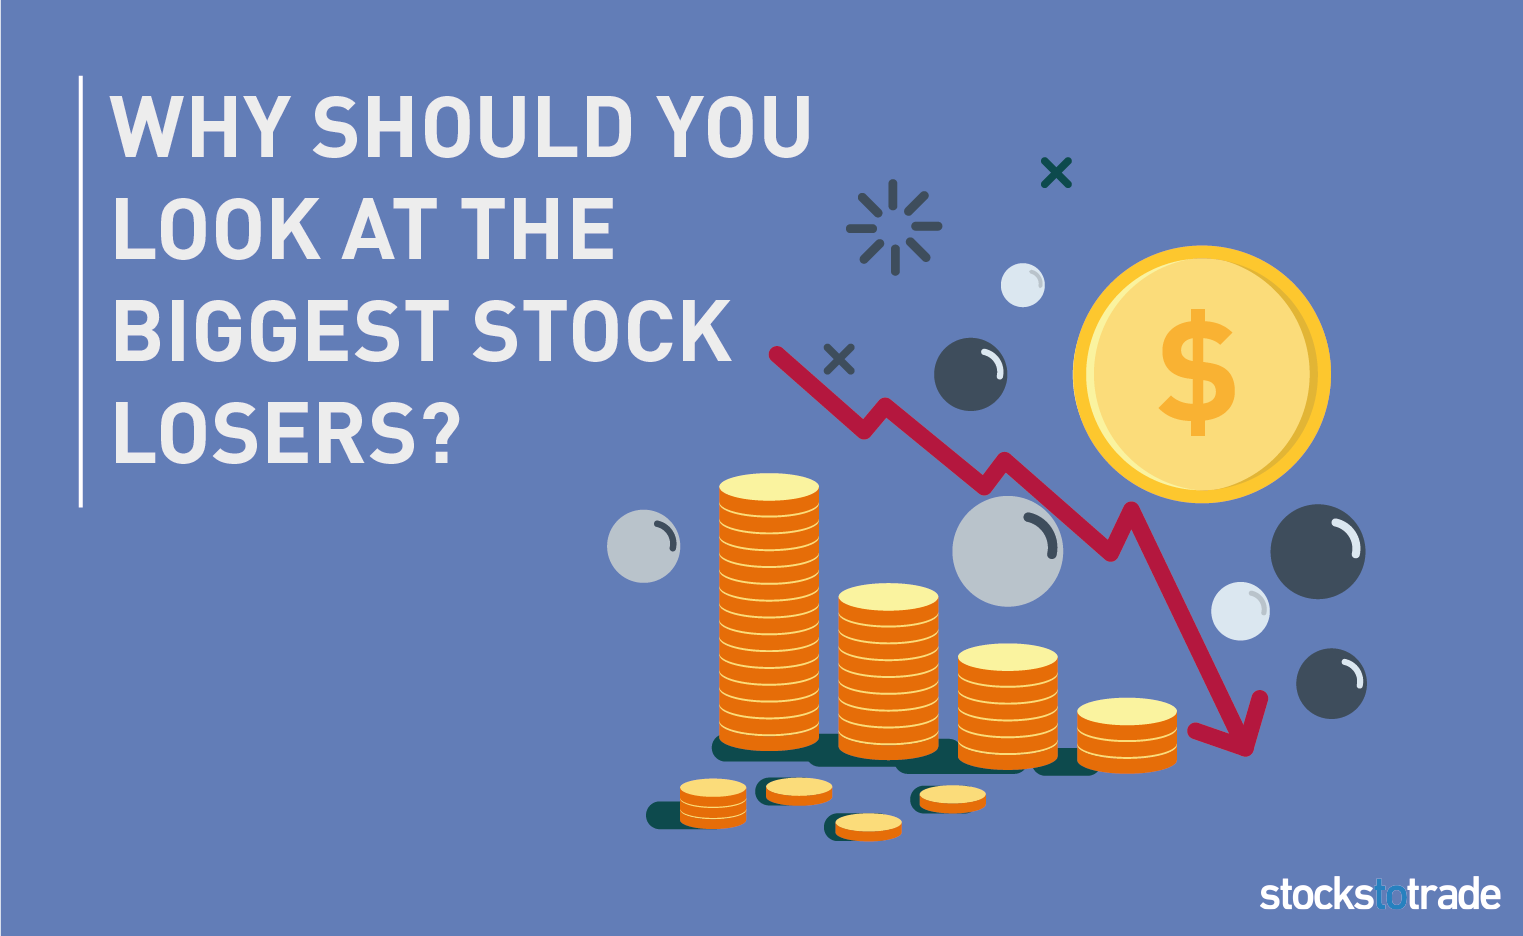 Why Should You Look at the Biggest Stock Losers?